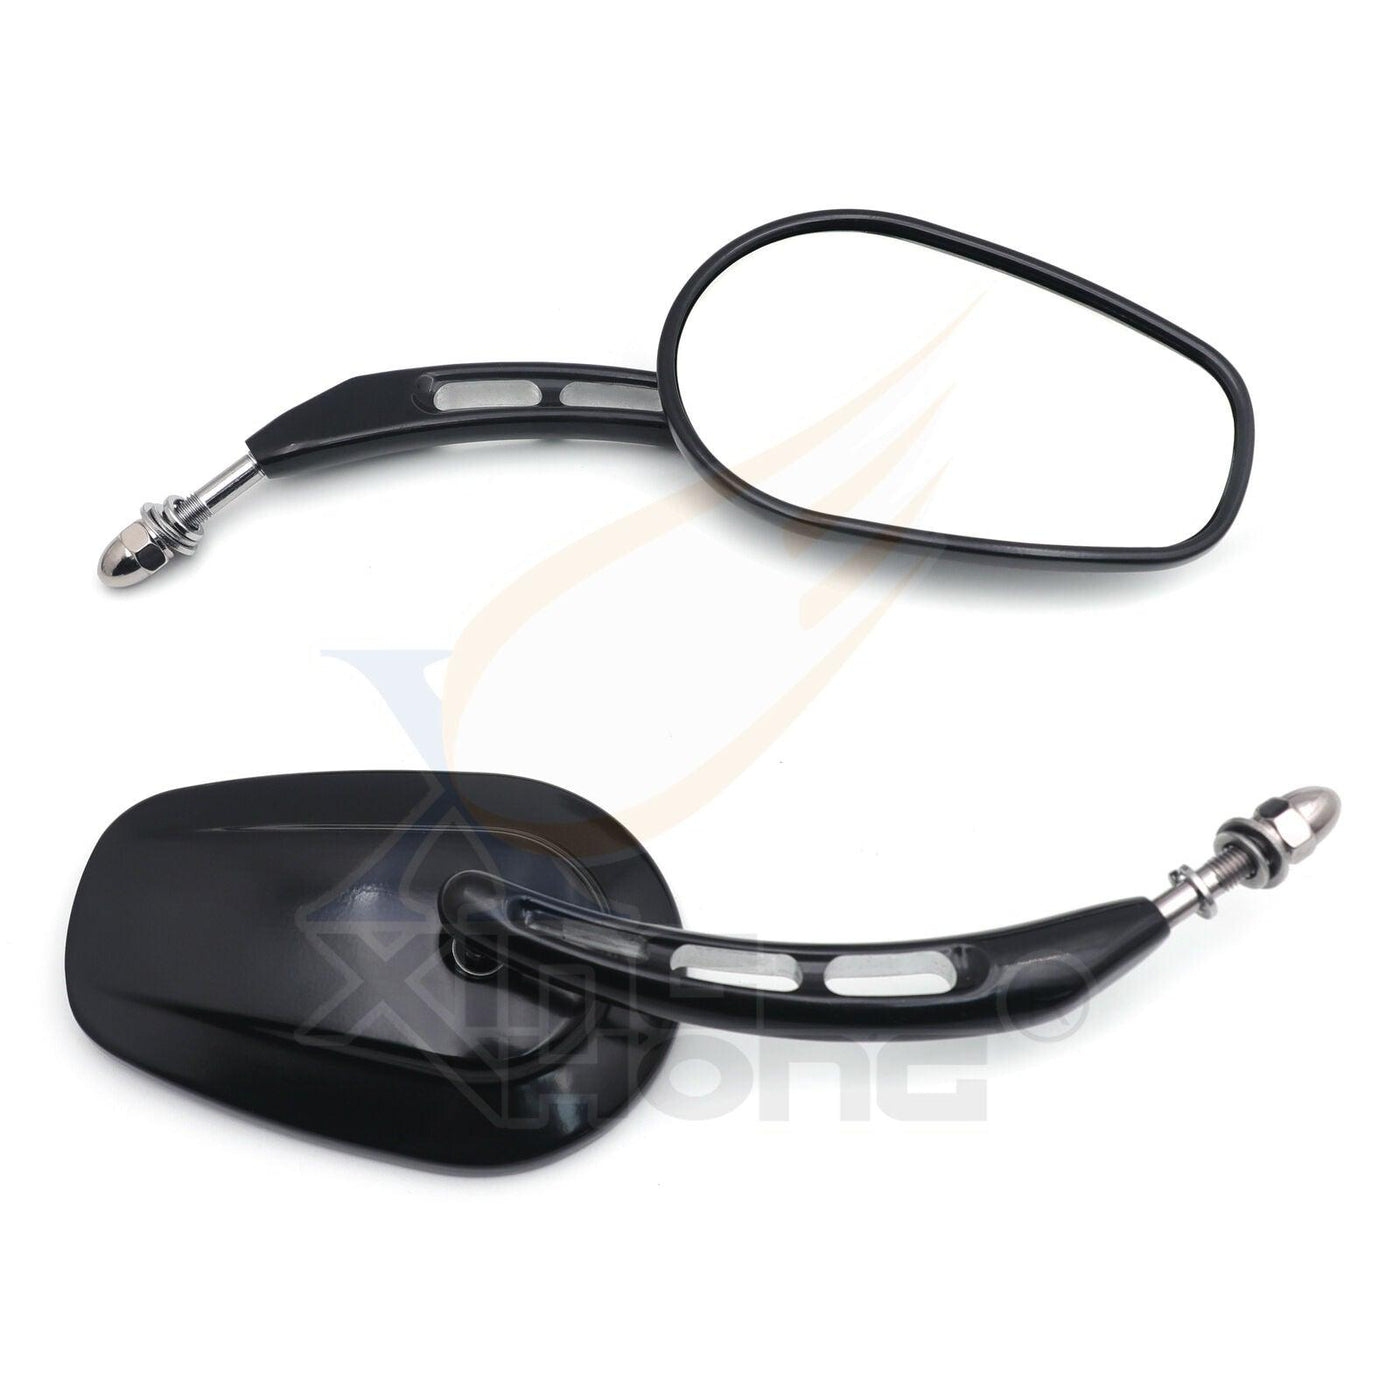 Black Big Side Mirrors For 1982-later Harley Night Train FXSTB Springer Softail - Moto Life Products